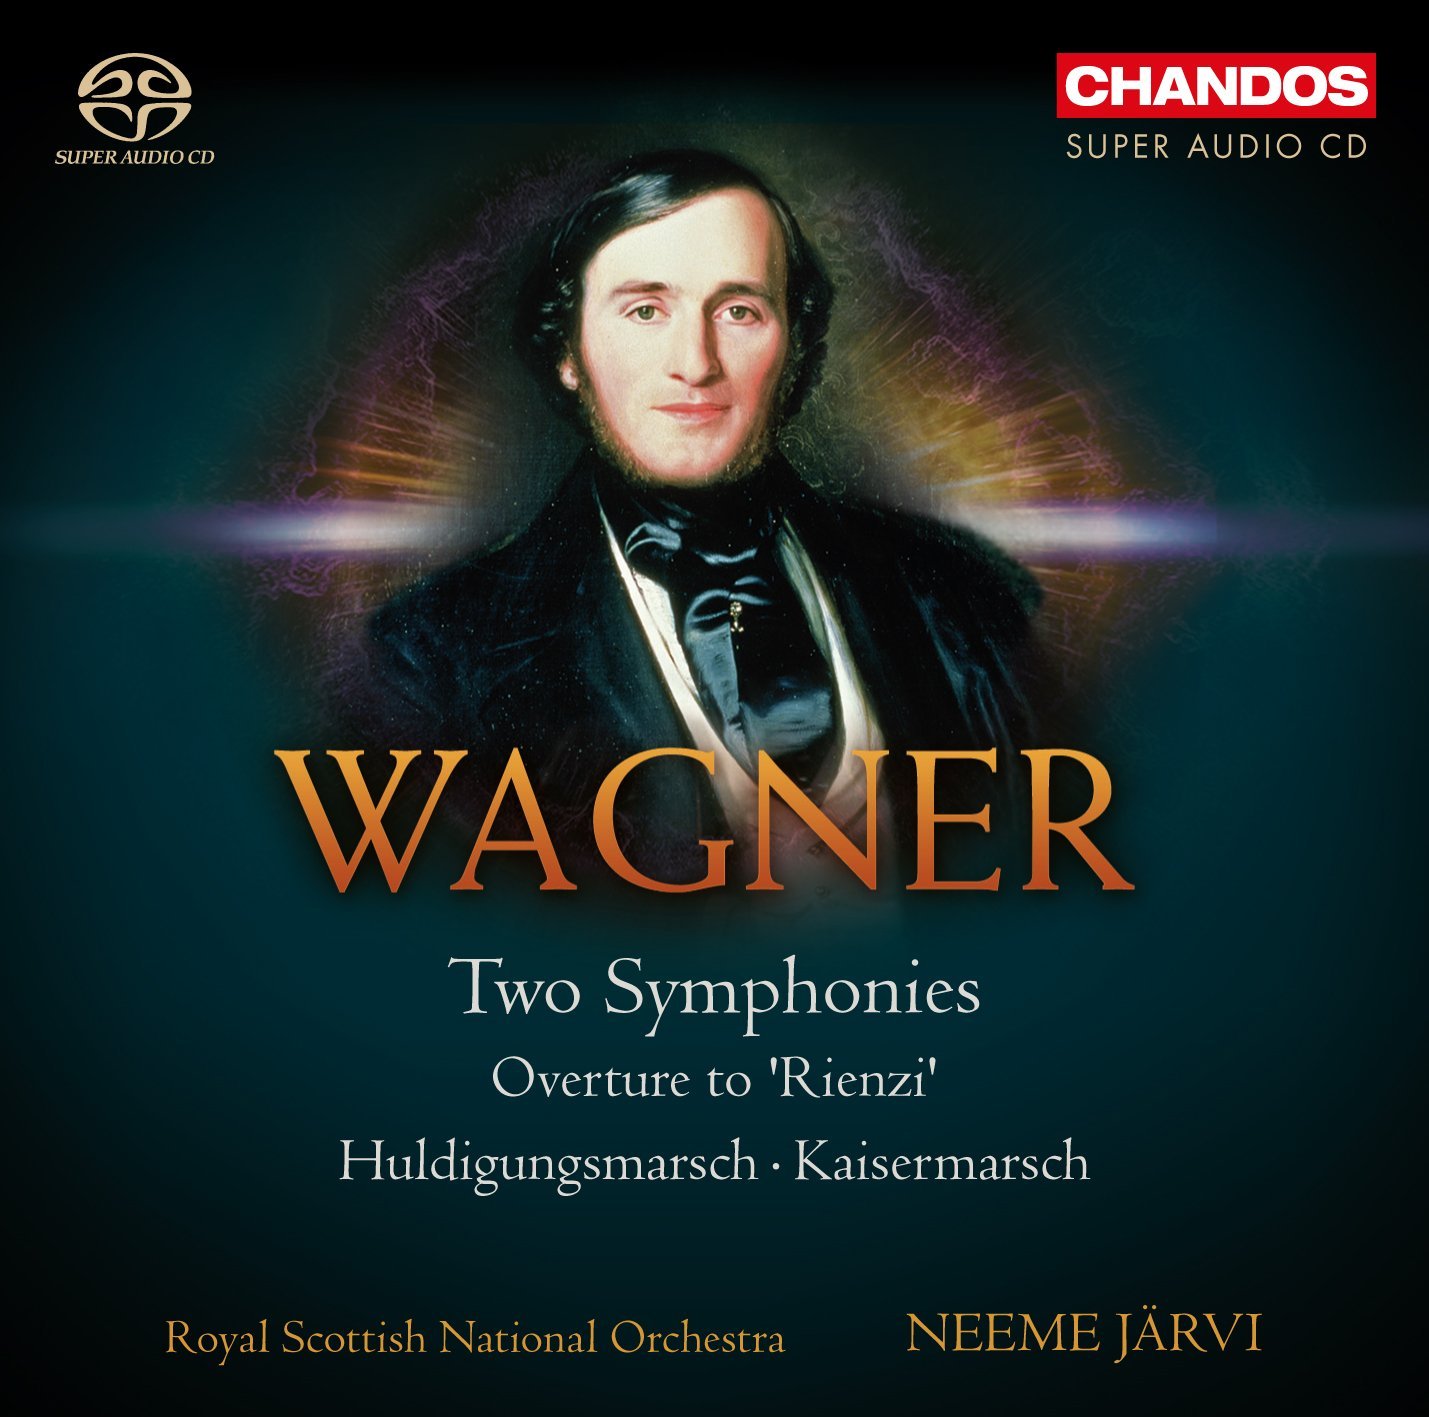 Royal Scottish National Orchestra, Neeme Jarvi - Wagner: Two Symphonies (2012) [theClassicalShop FLAC 24bit/96kHz]